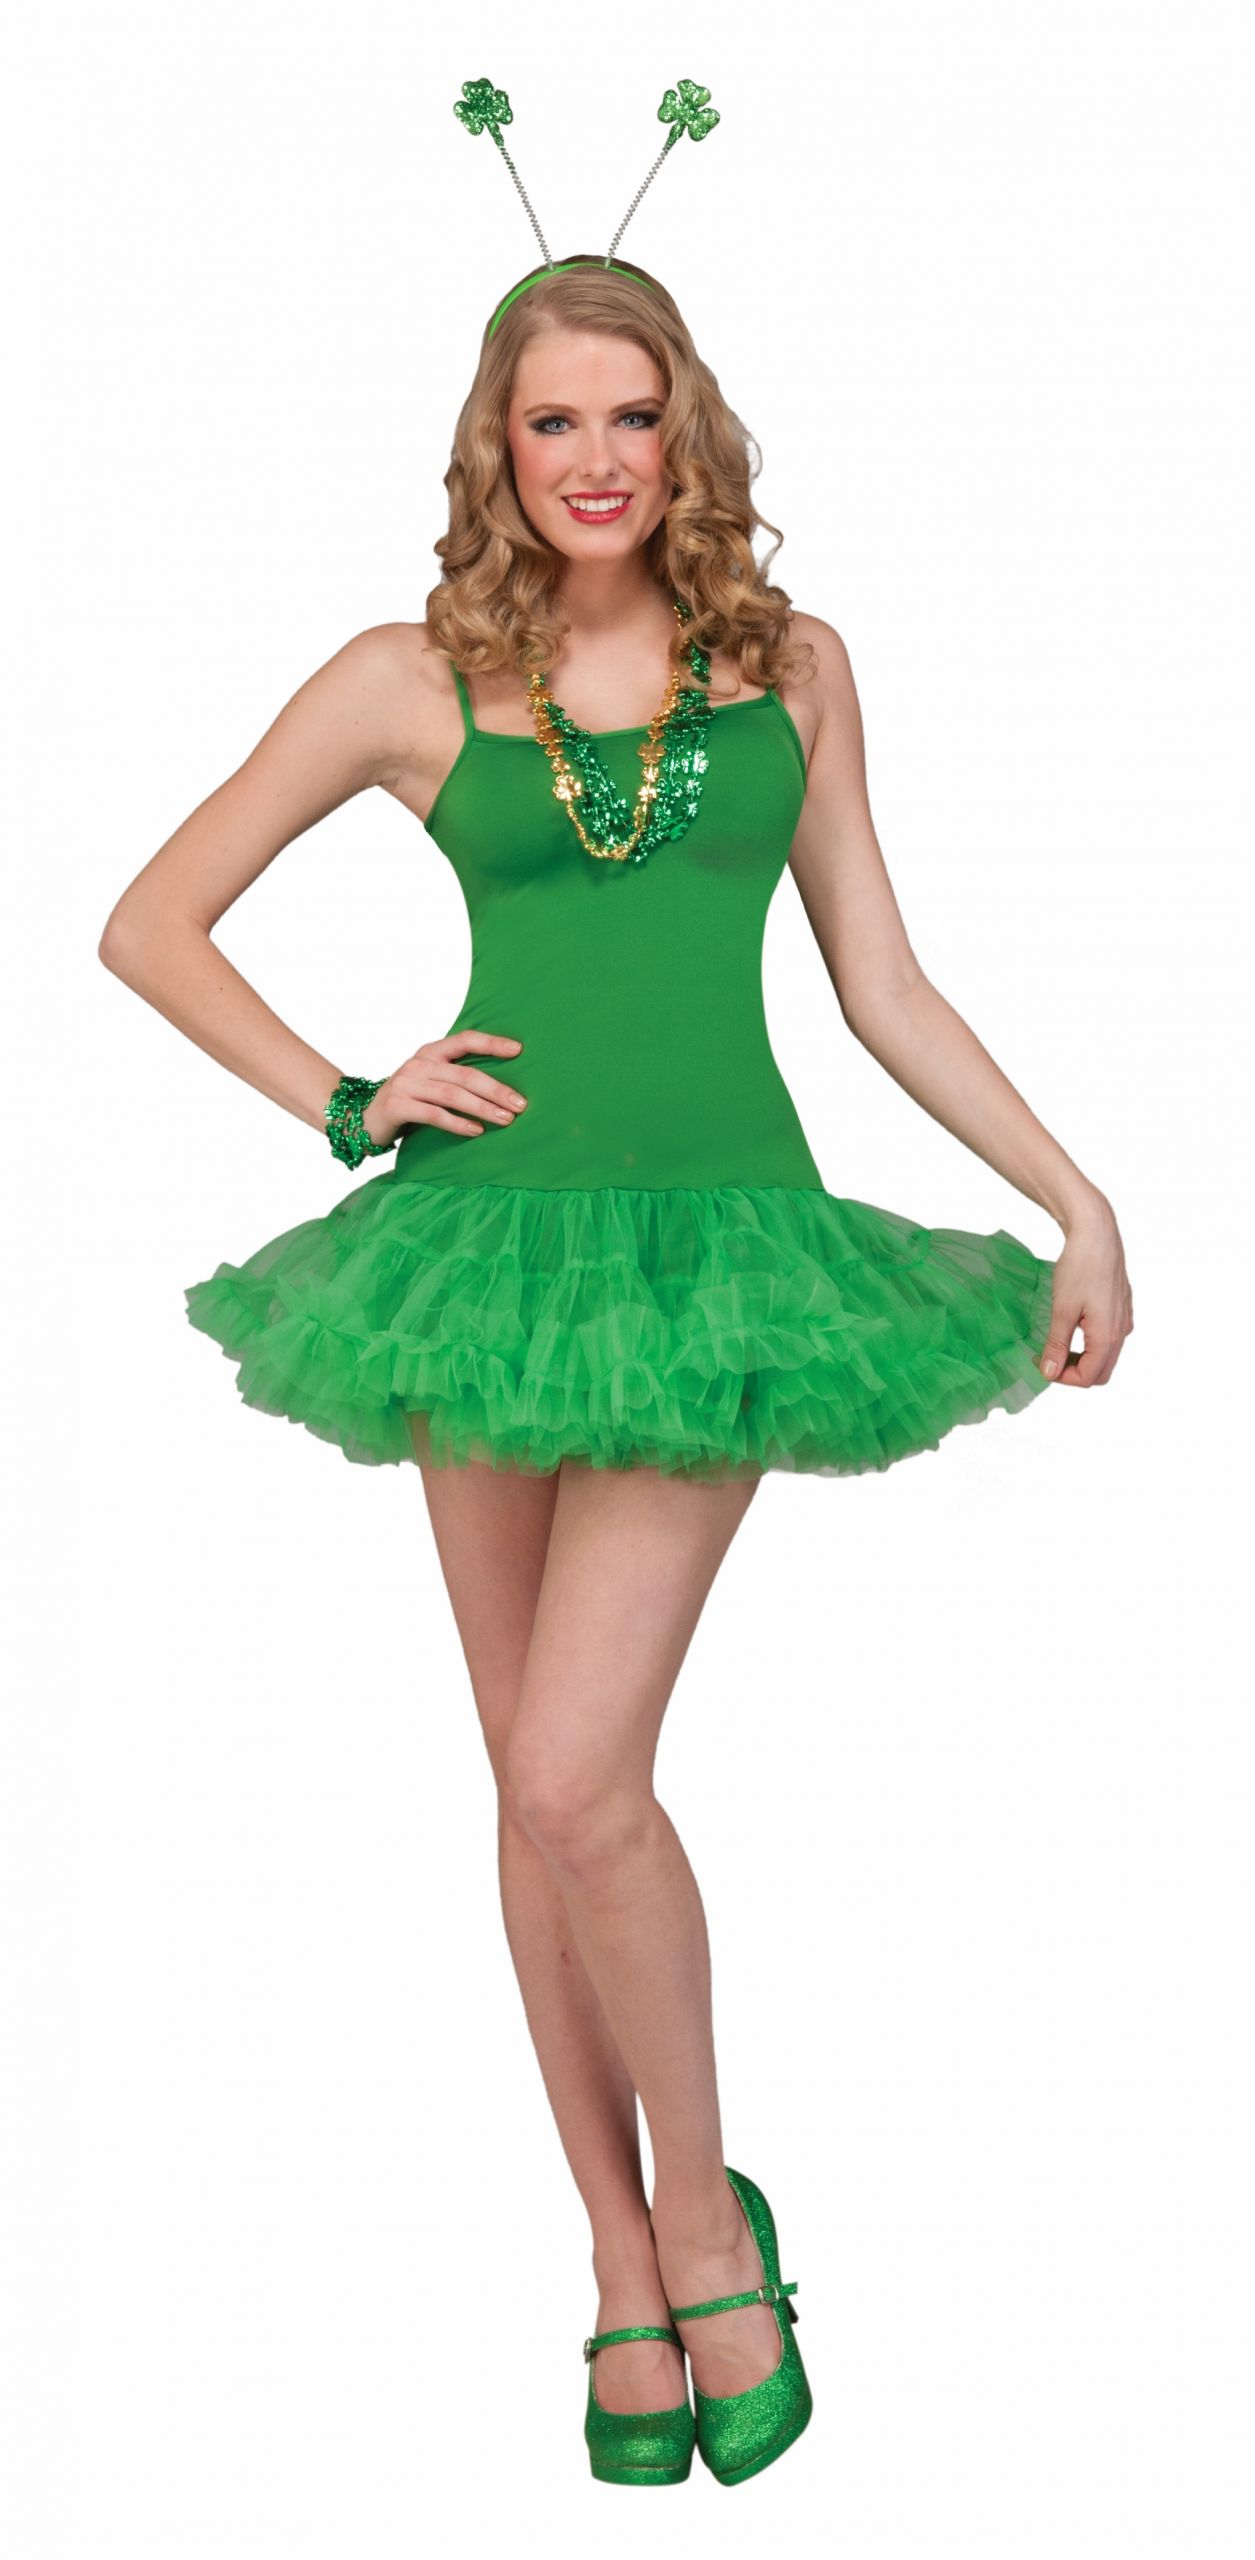 Party City St Patrick's Day Costumes
 St Patrick s Green Petticoat Costume Dress Adult